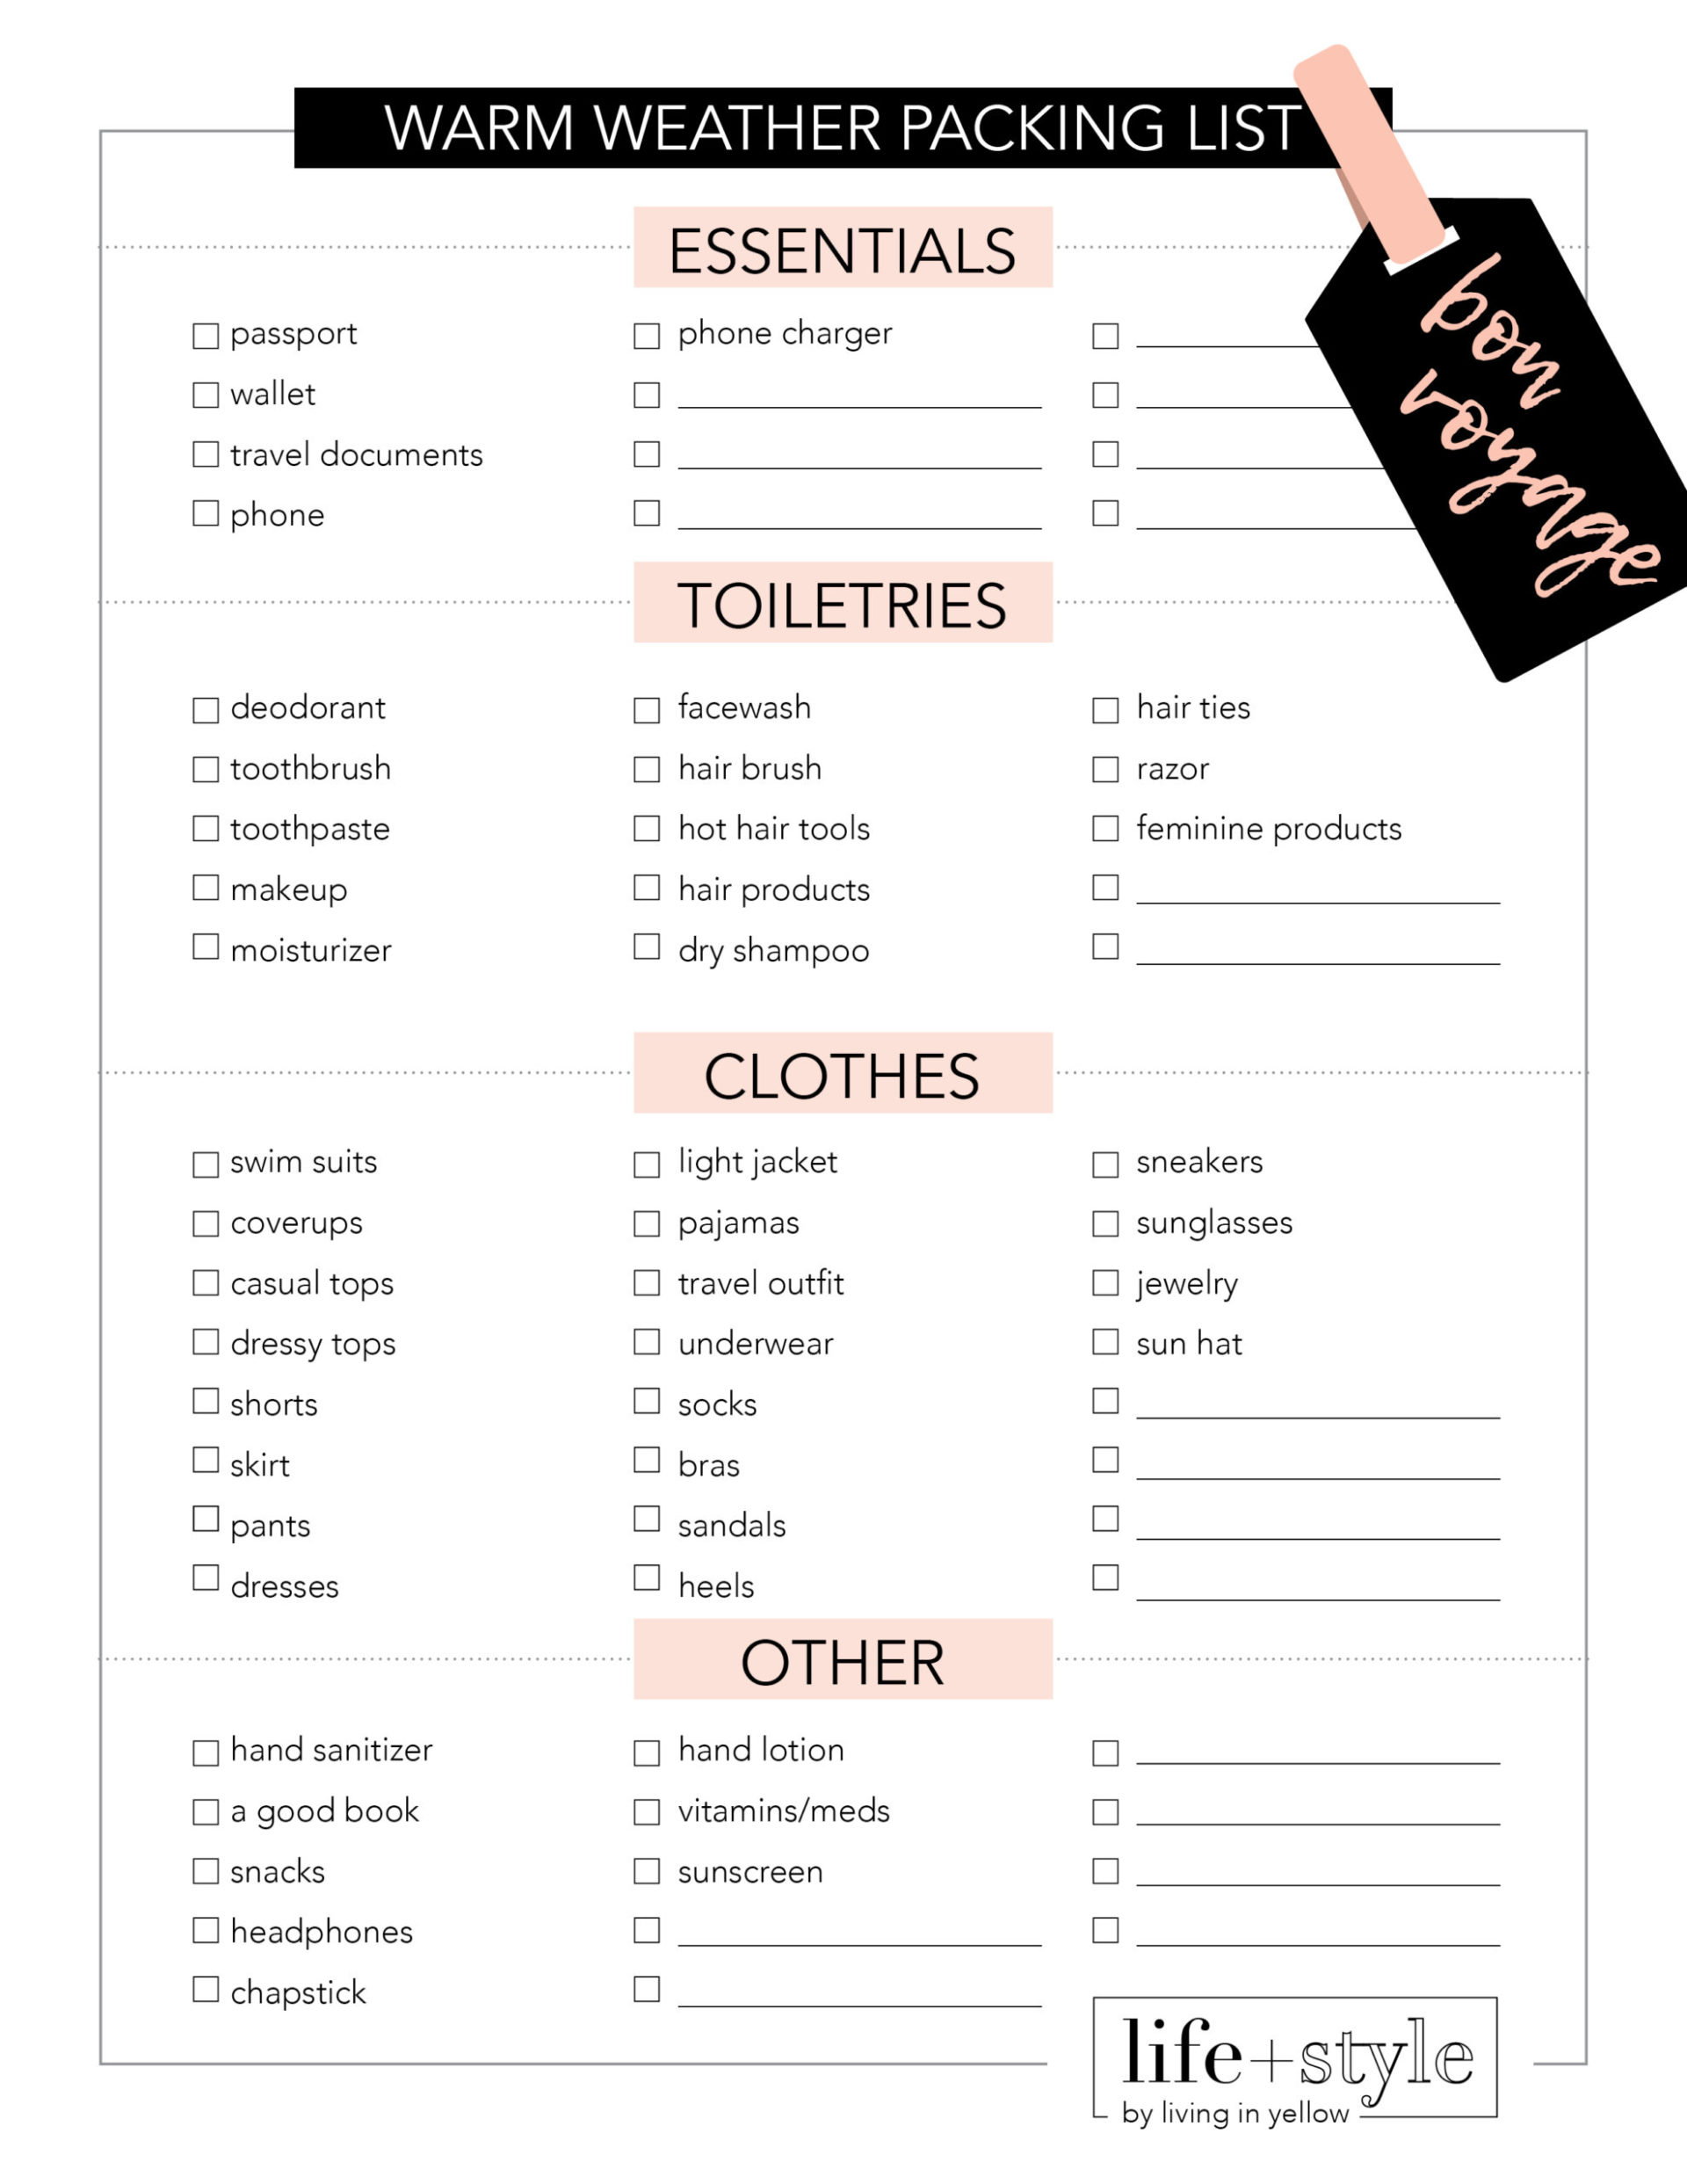 Travel Essentials Packing List for Winter (Cold Weather) Travels